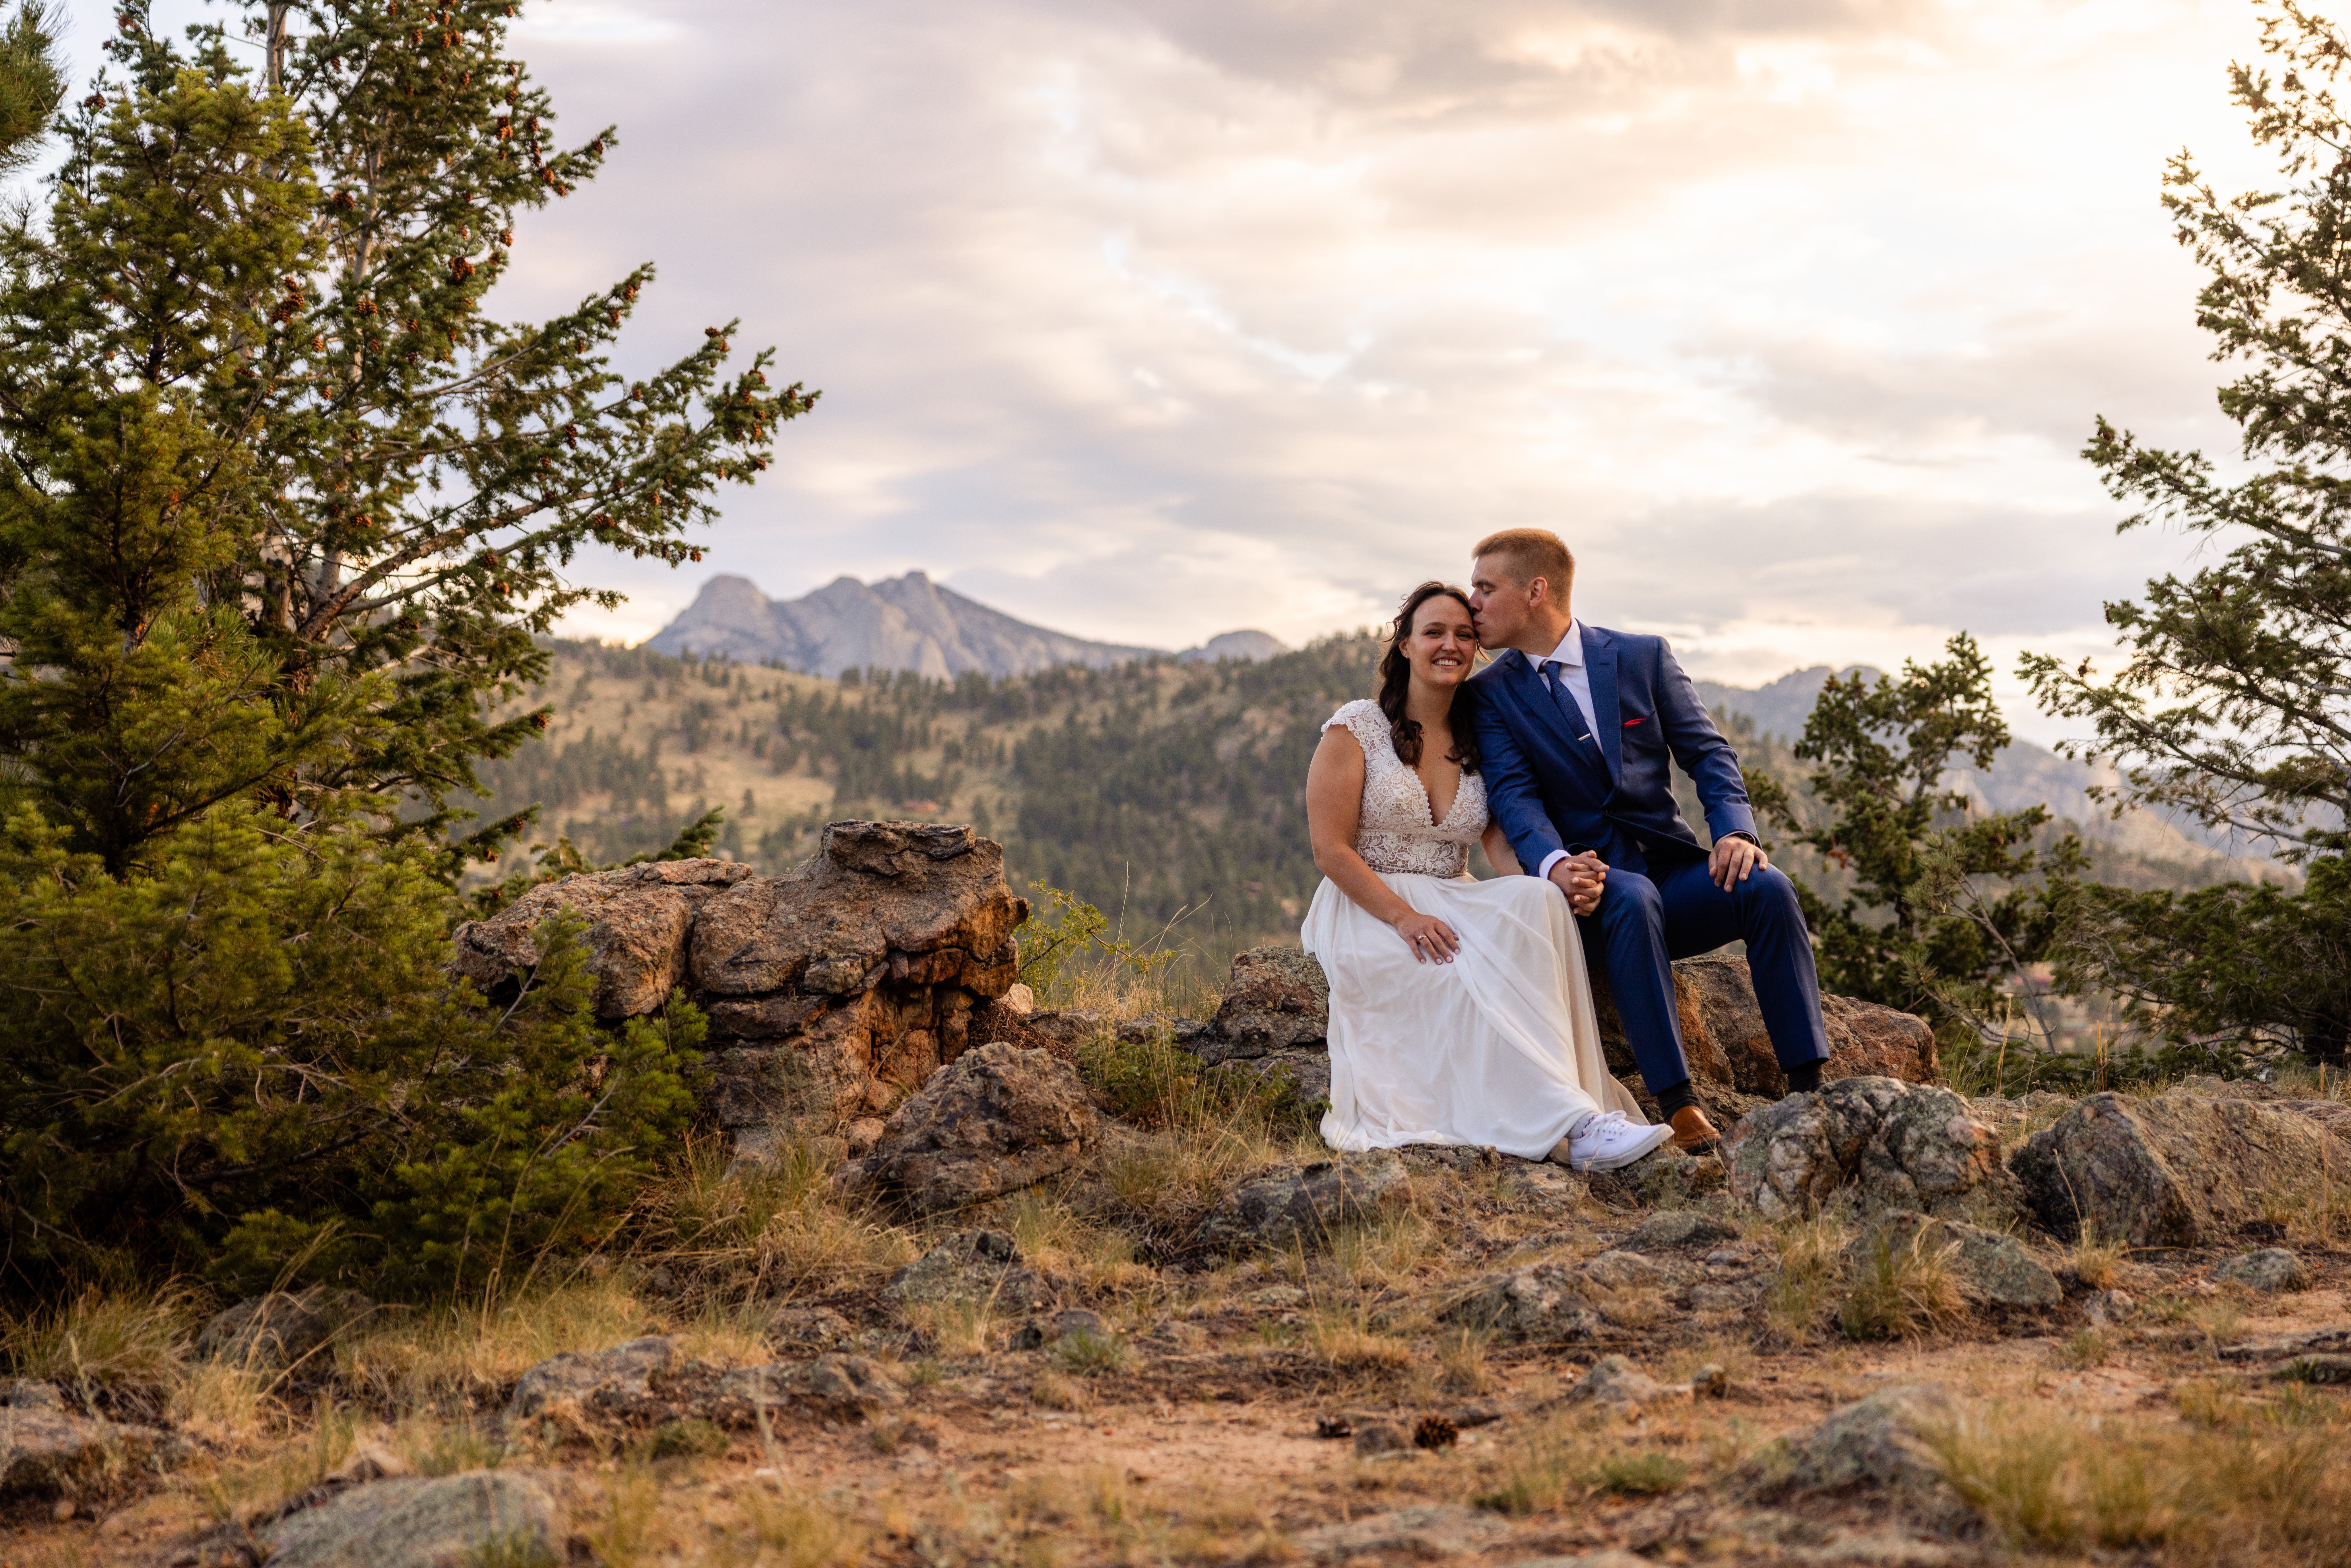 the groom kisses his bride on their wedding day during their portraits near Romantic RiverSong Inn in Estes Park.